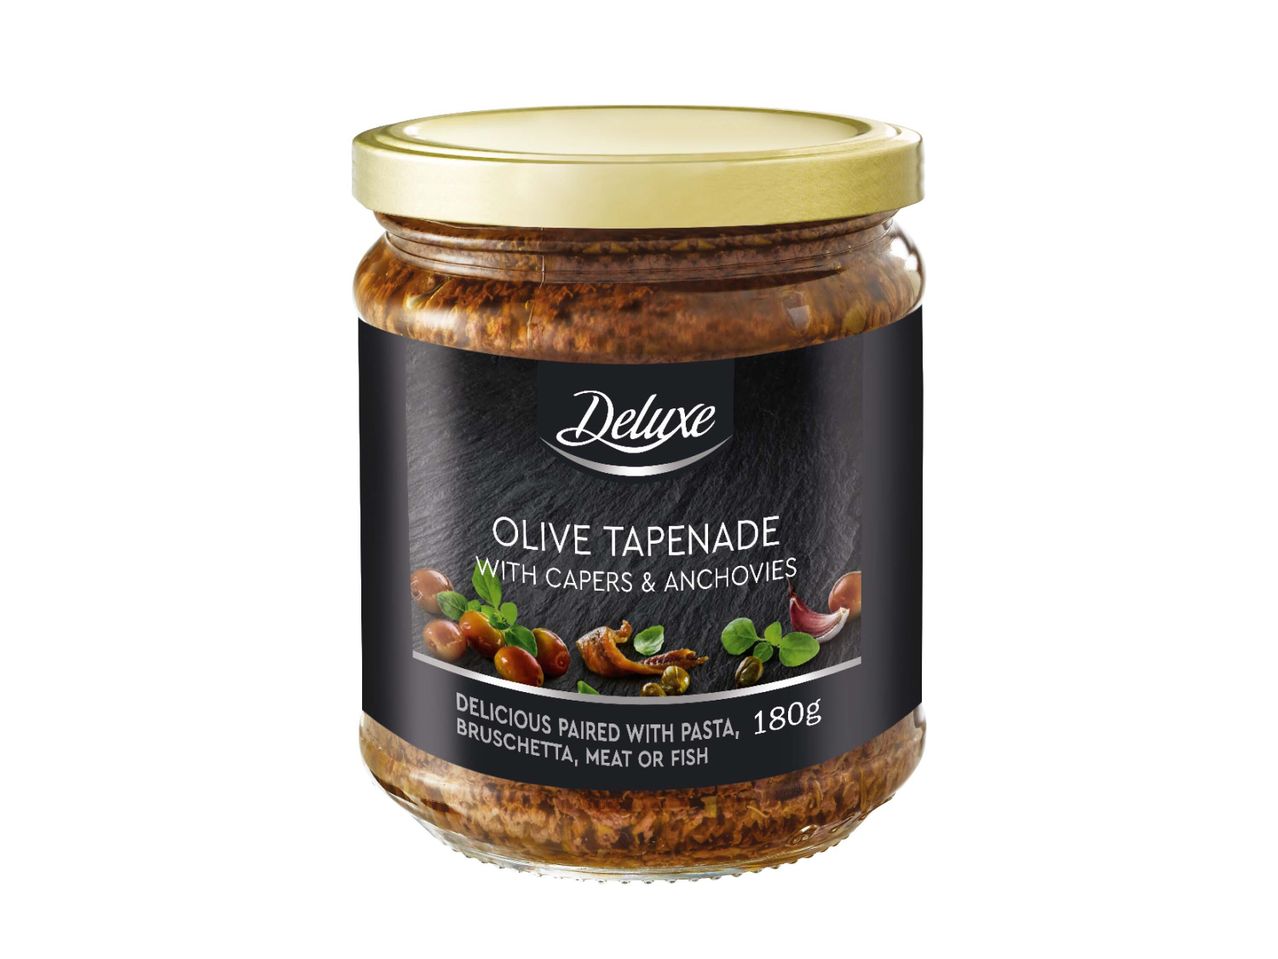 Go to full screen view: Leccino Olive Tapenade - Image 1